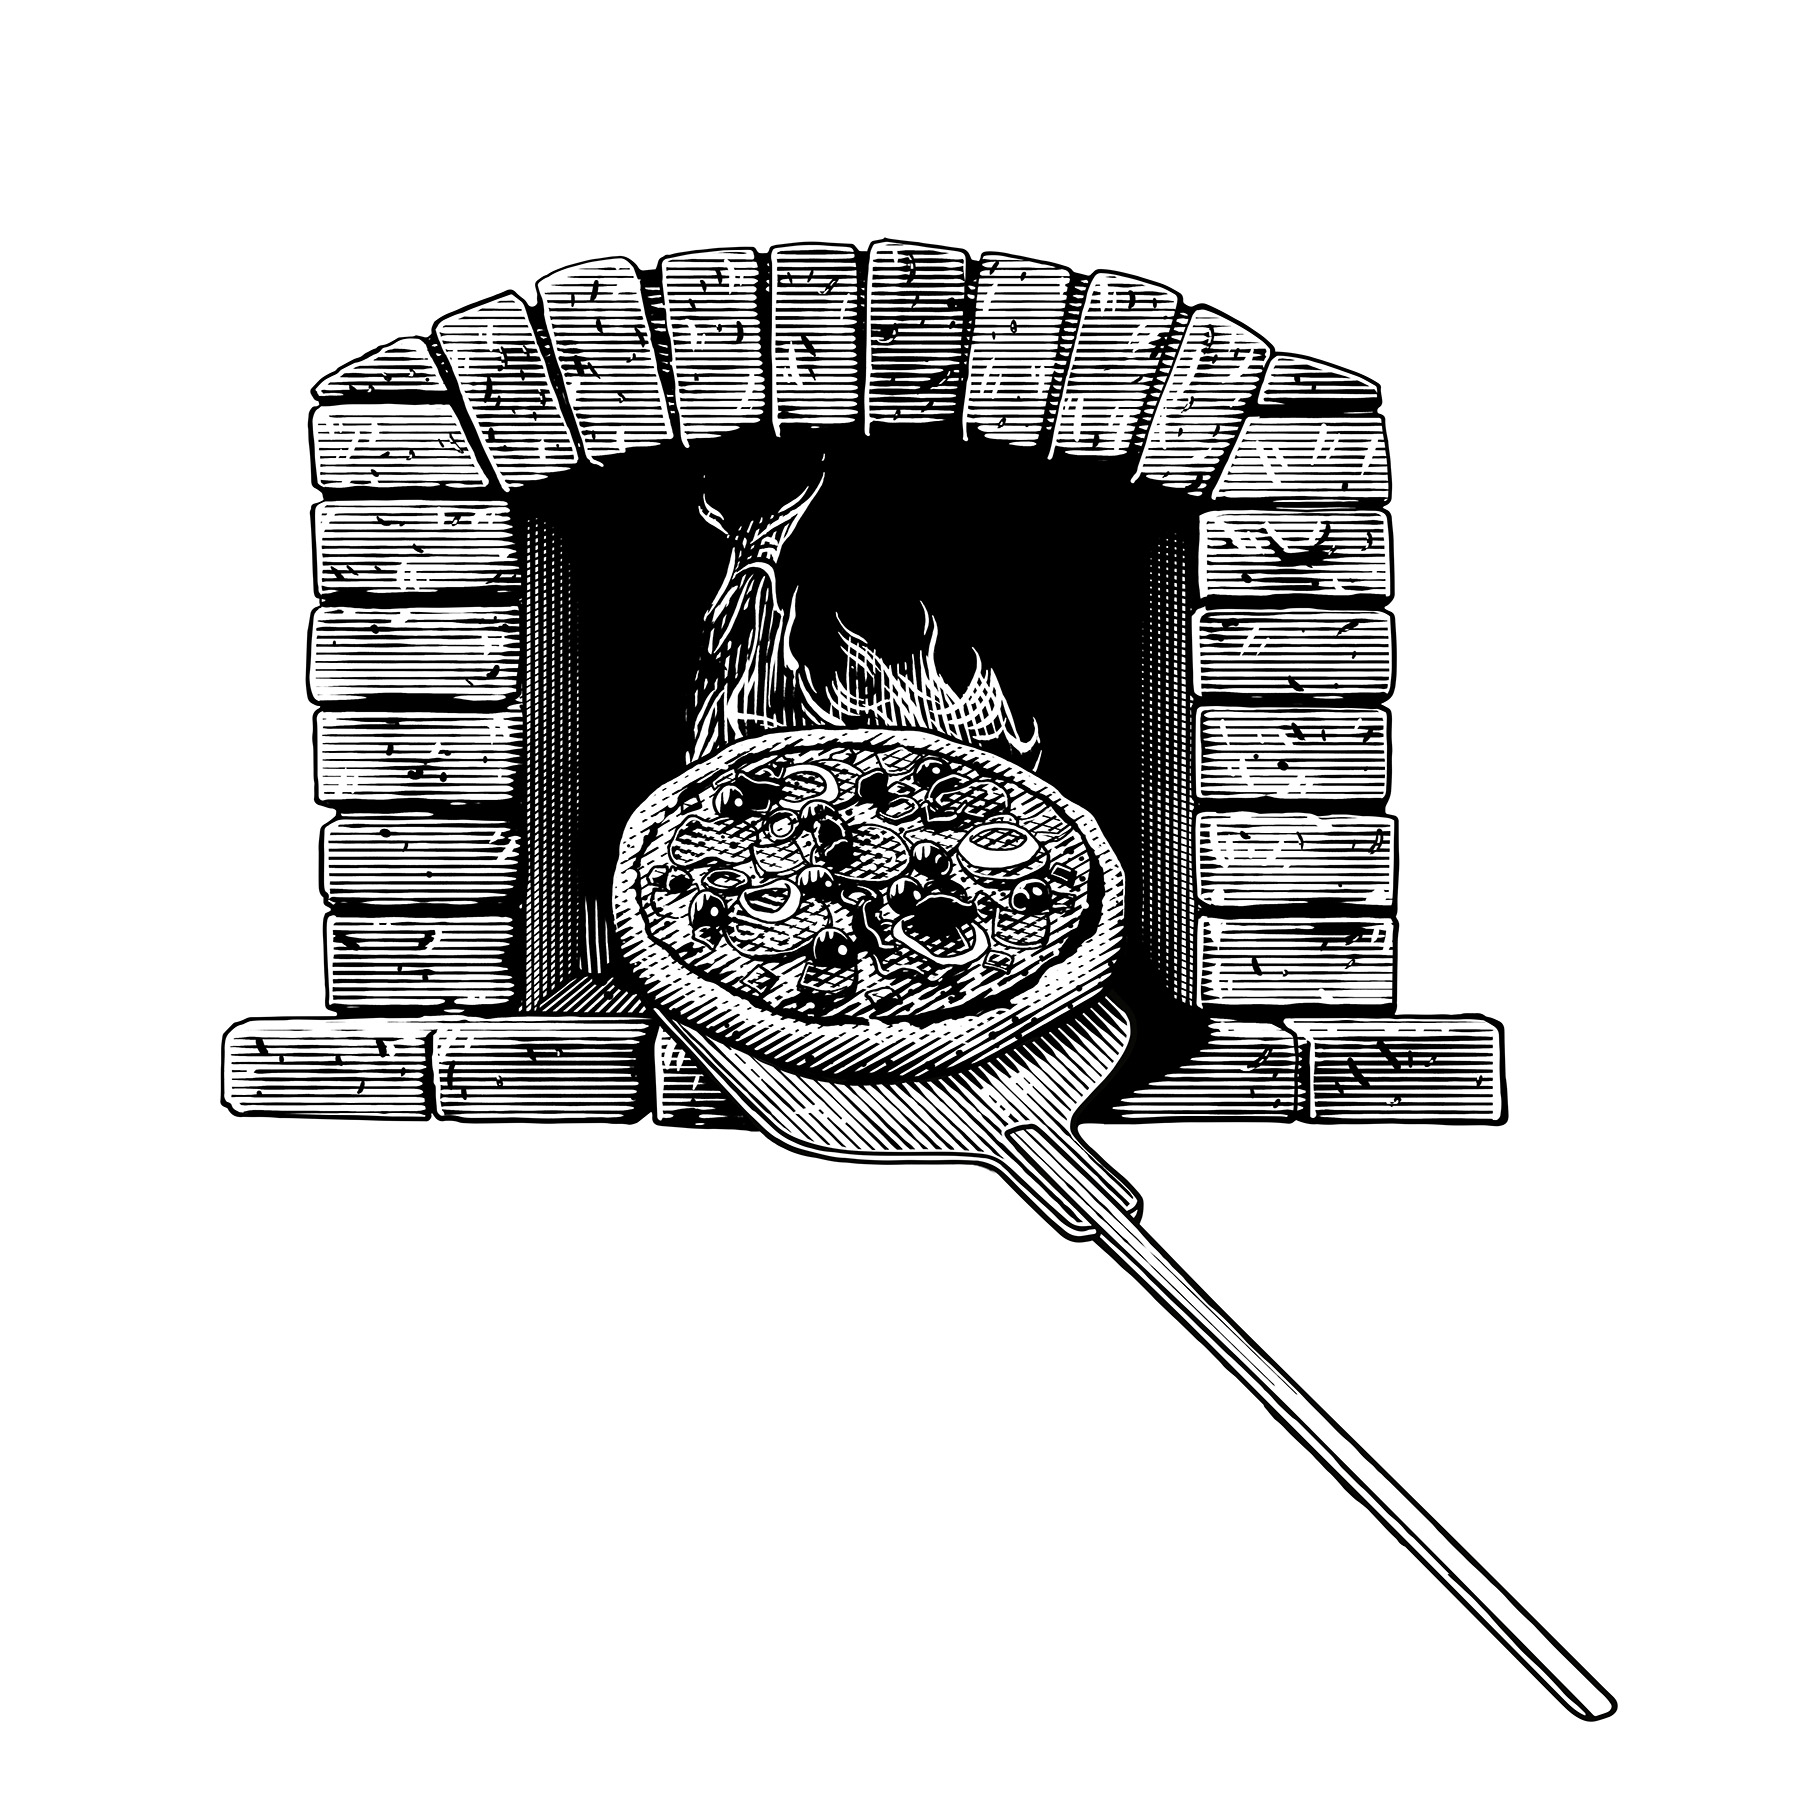 stone-baked pizza in the wood oven etching illustration in engraving style gravyr träsnitt 